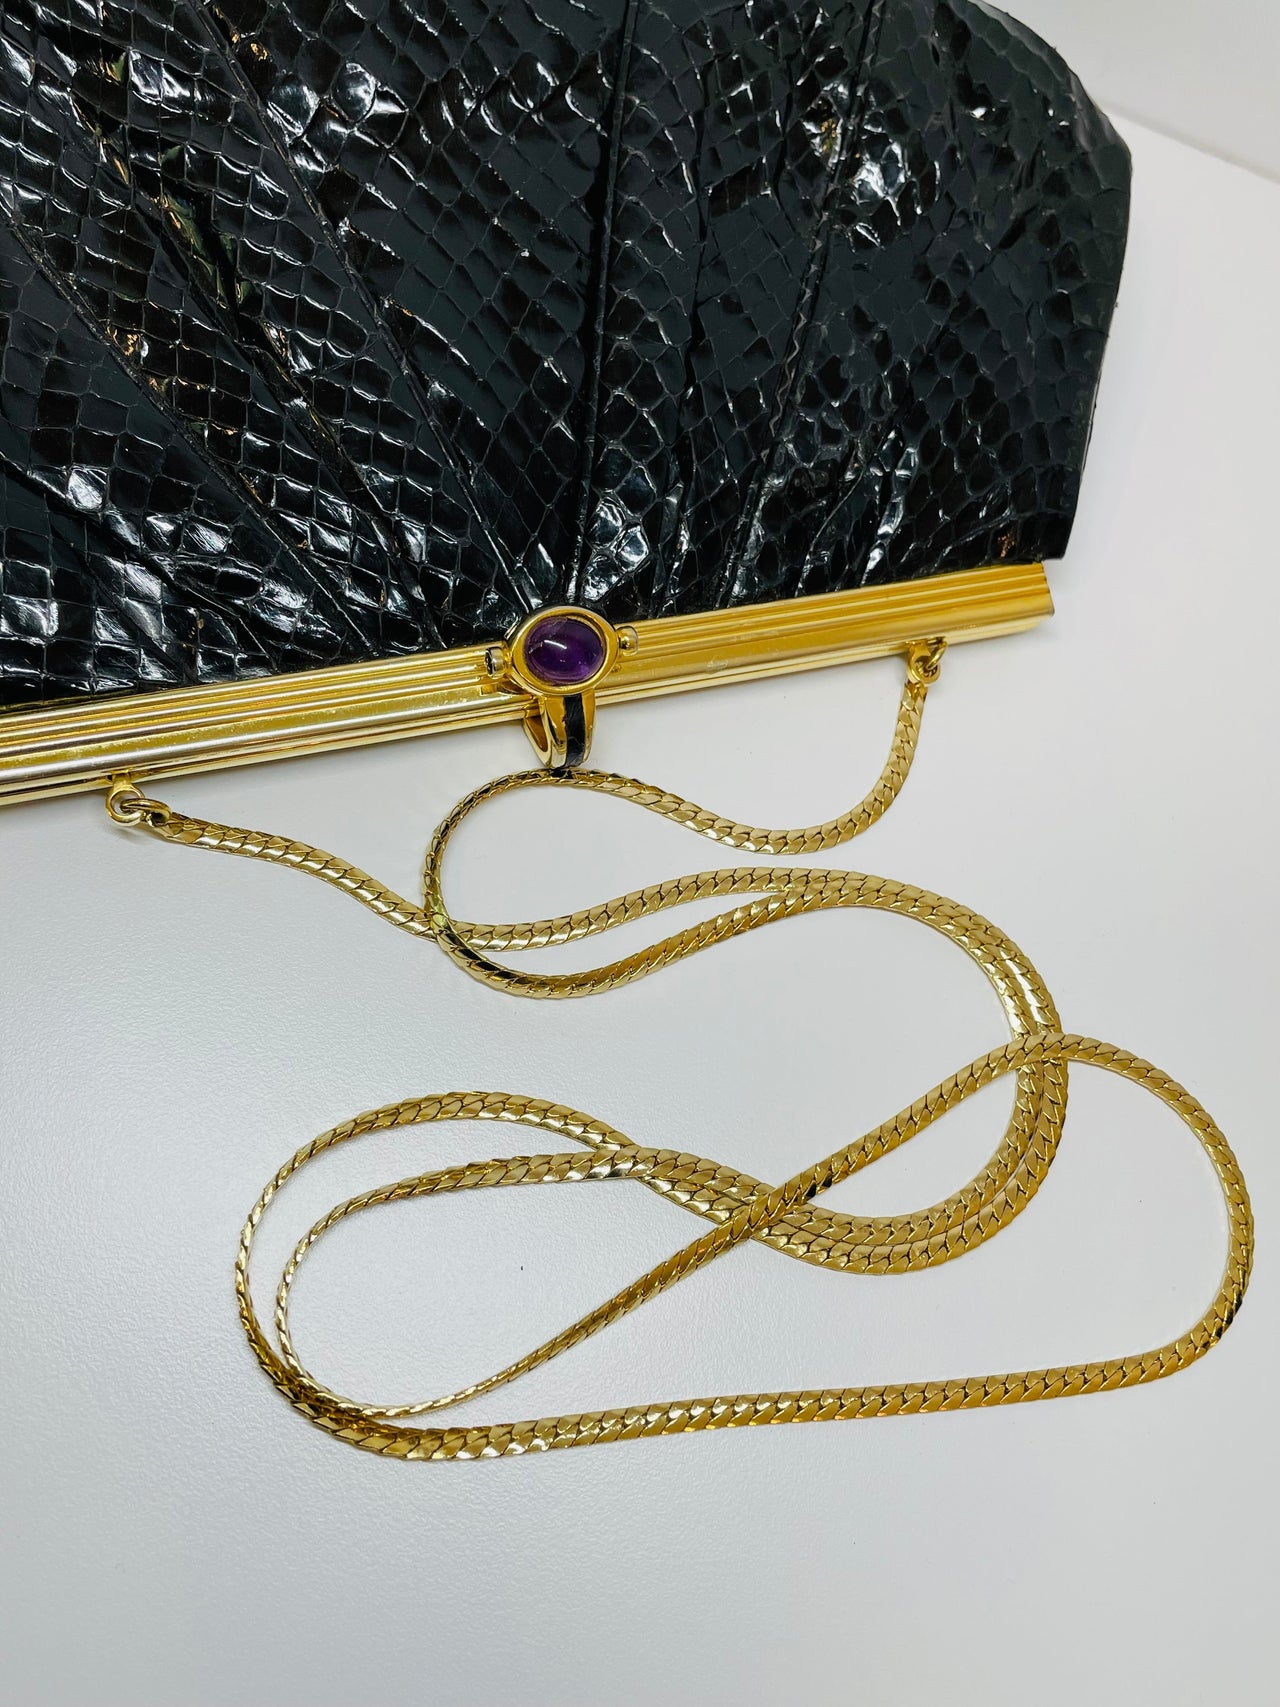 Judith Lieber Black Snake Skin and Brass Purse with Purple Cabochon Devil's Details 